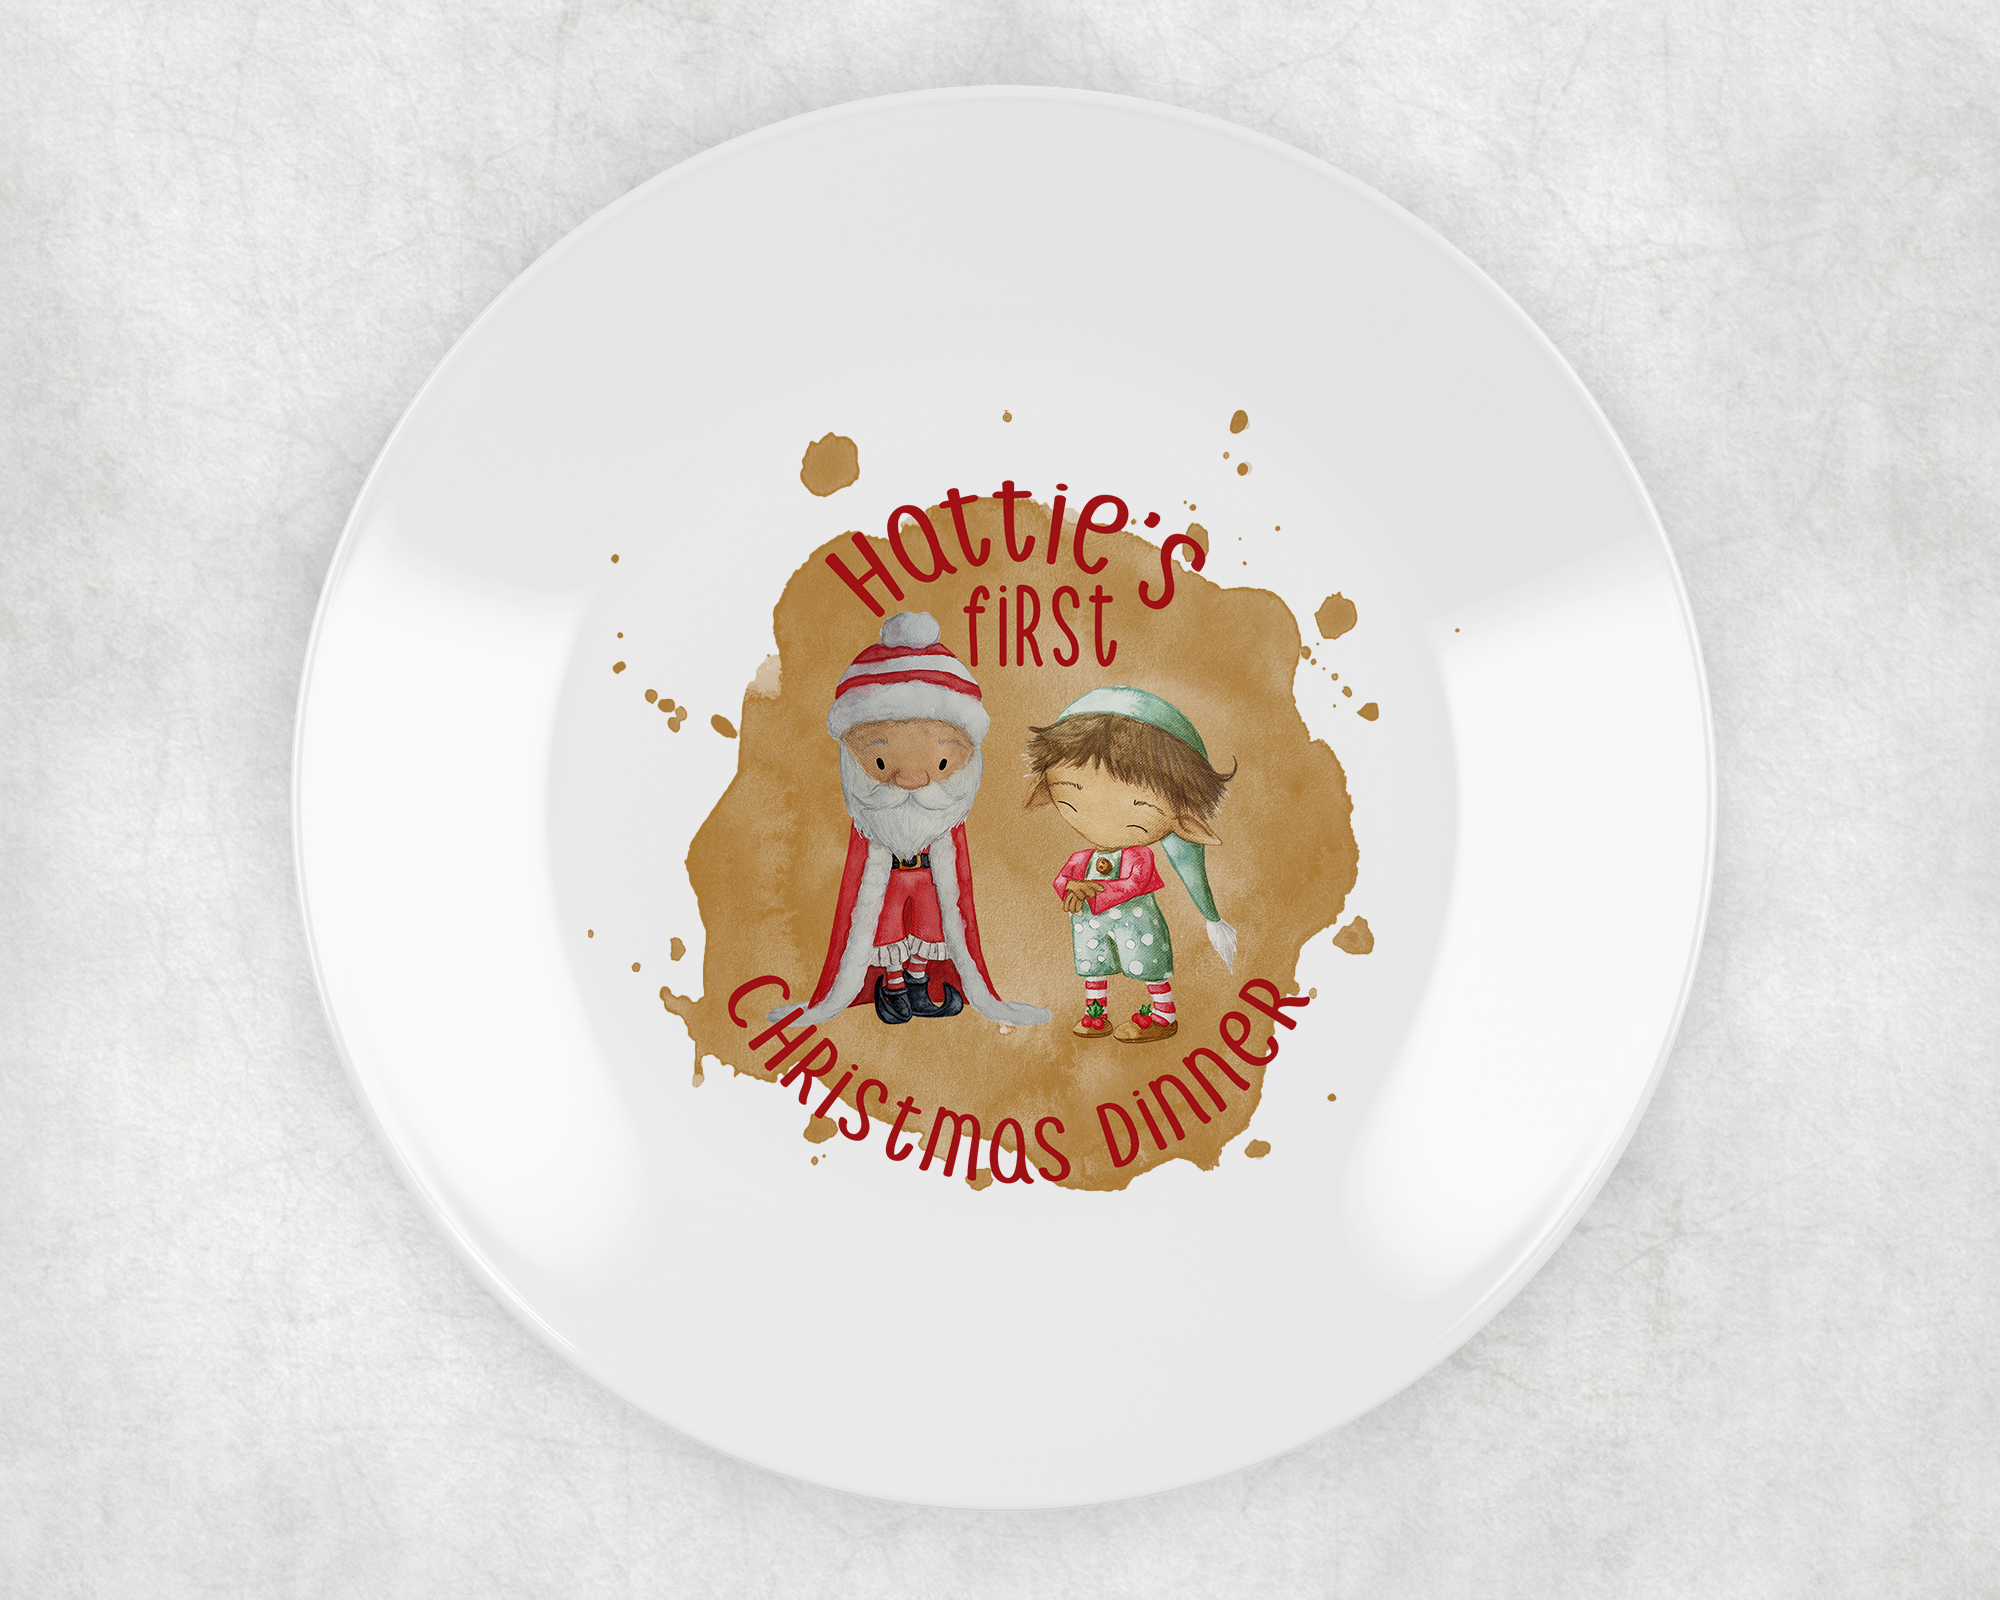 my first christmas plate personalised with santa and elf. ideal plastic non breakable plate. santa boy elf brown hair gold background